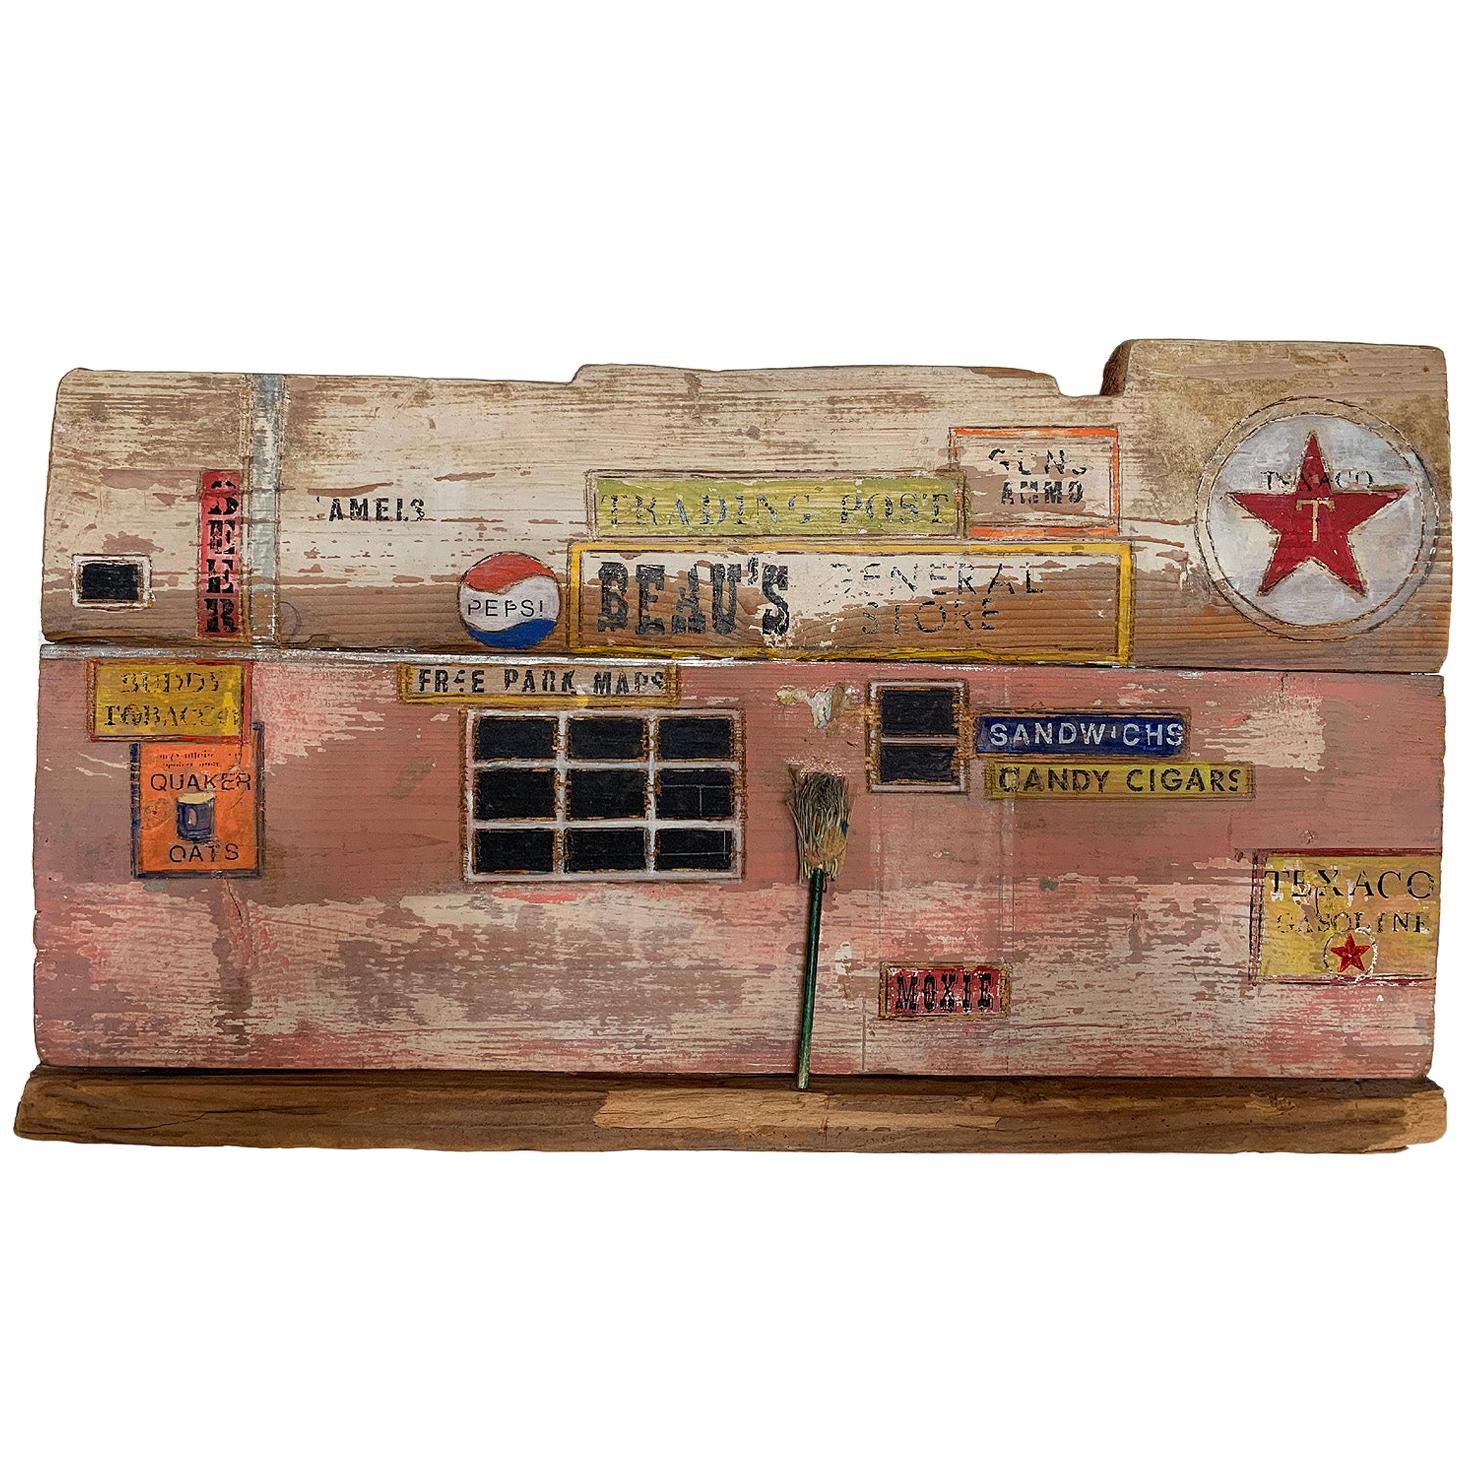 Mary Tommy Thomas Wood Sculpture "Beau's General Store"